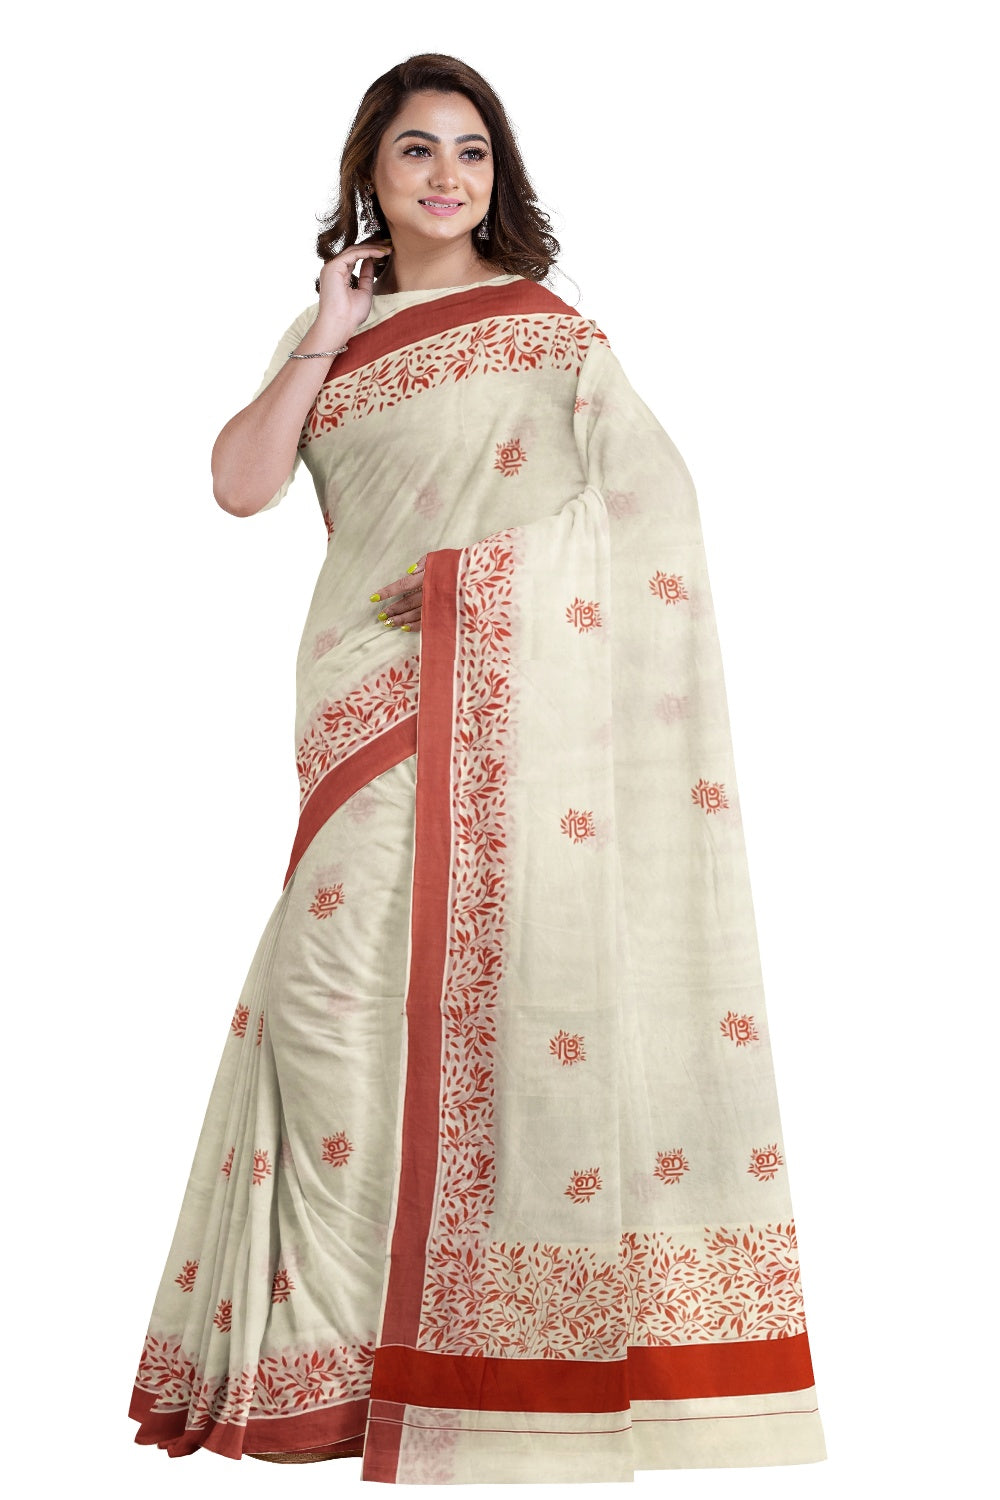 Southloom Red Border Kerala Saree with Malayalam Themed Prints (by Govt of Kerala)